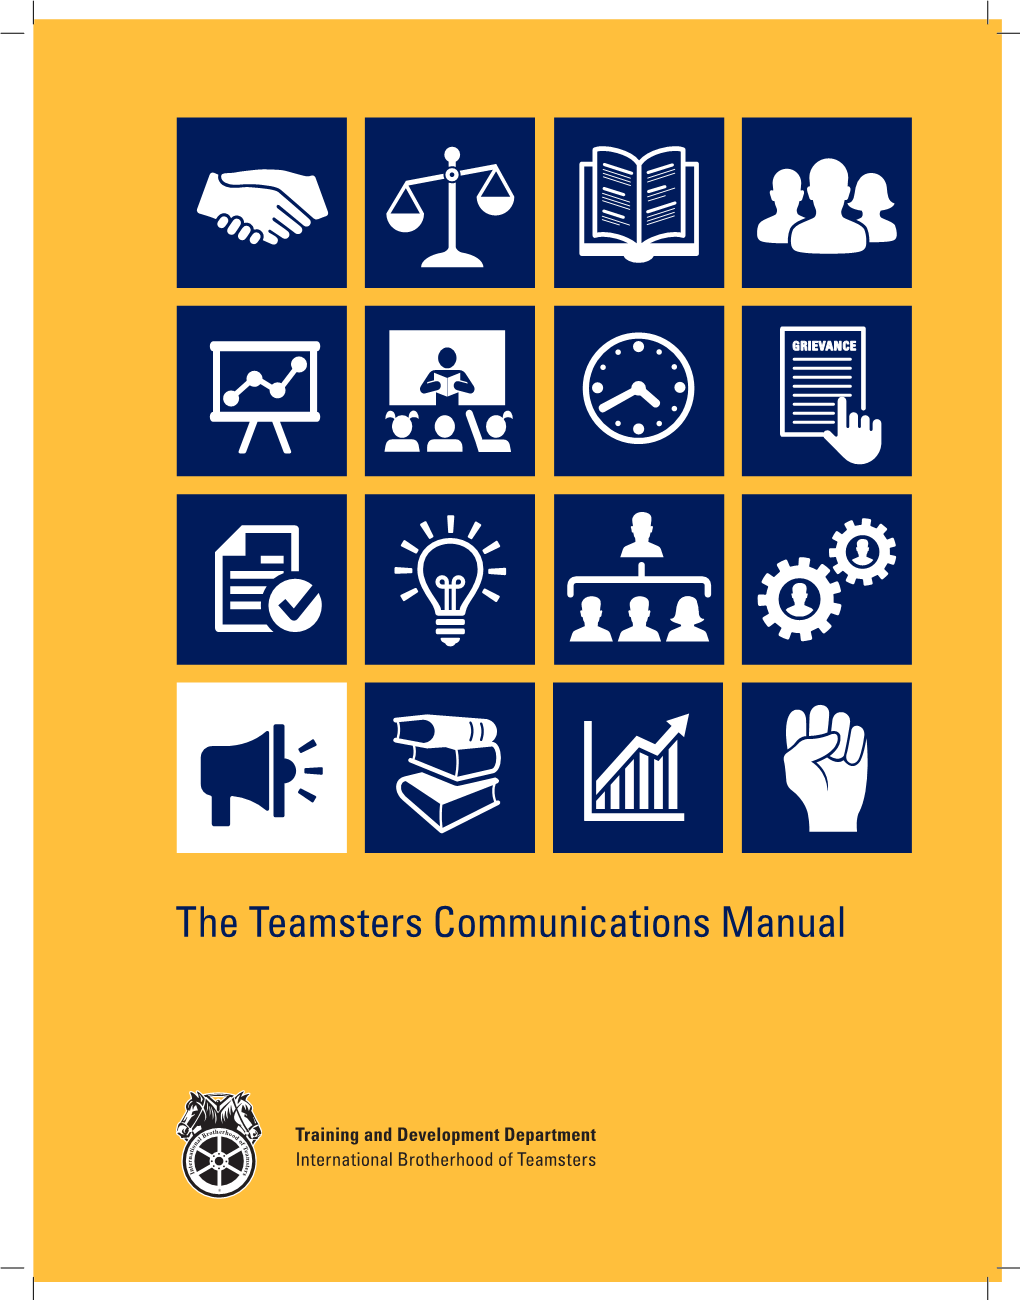 The Teamsters Communications Manual